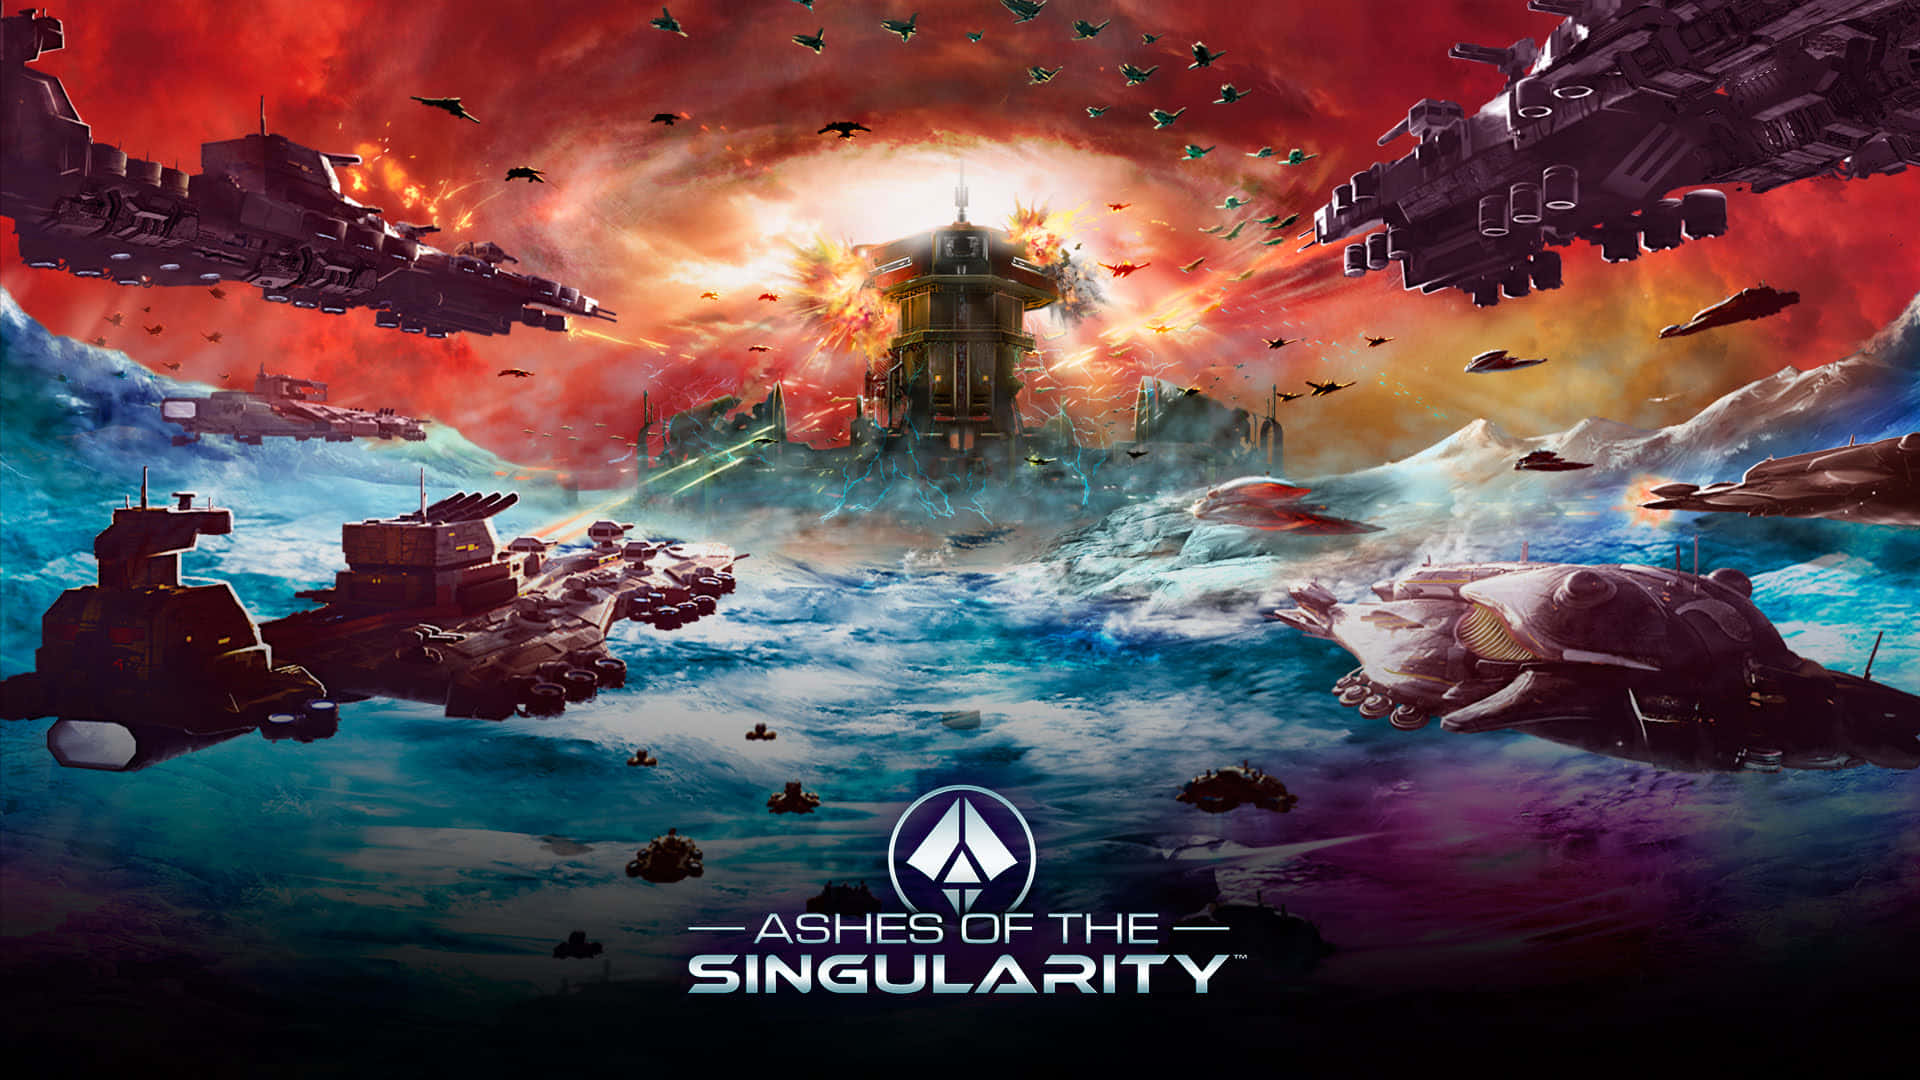 Battle for Total Domination in Ashes of the Singularity